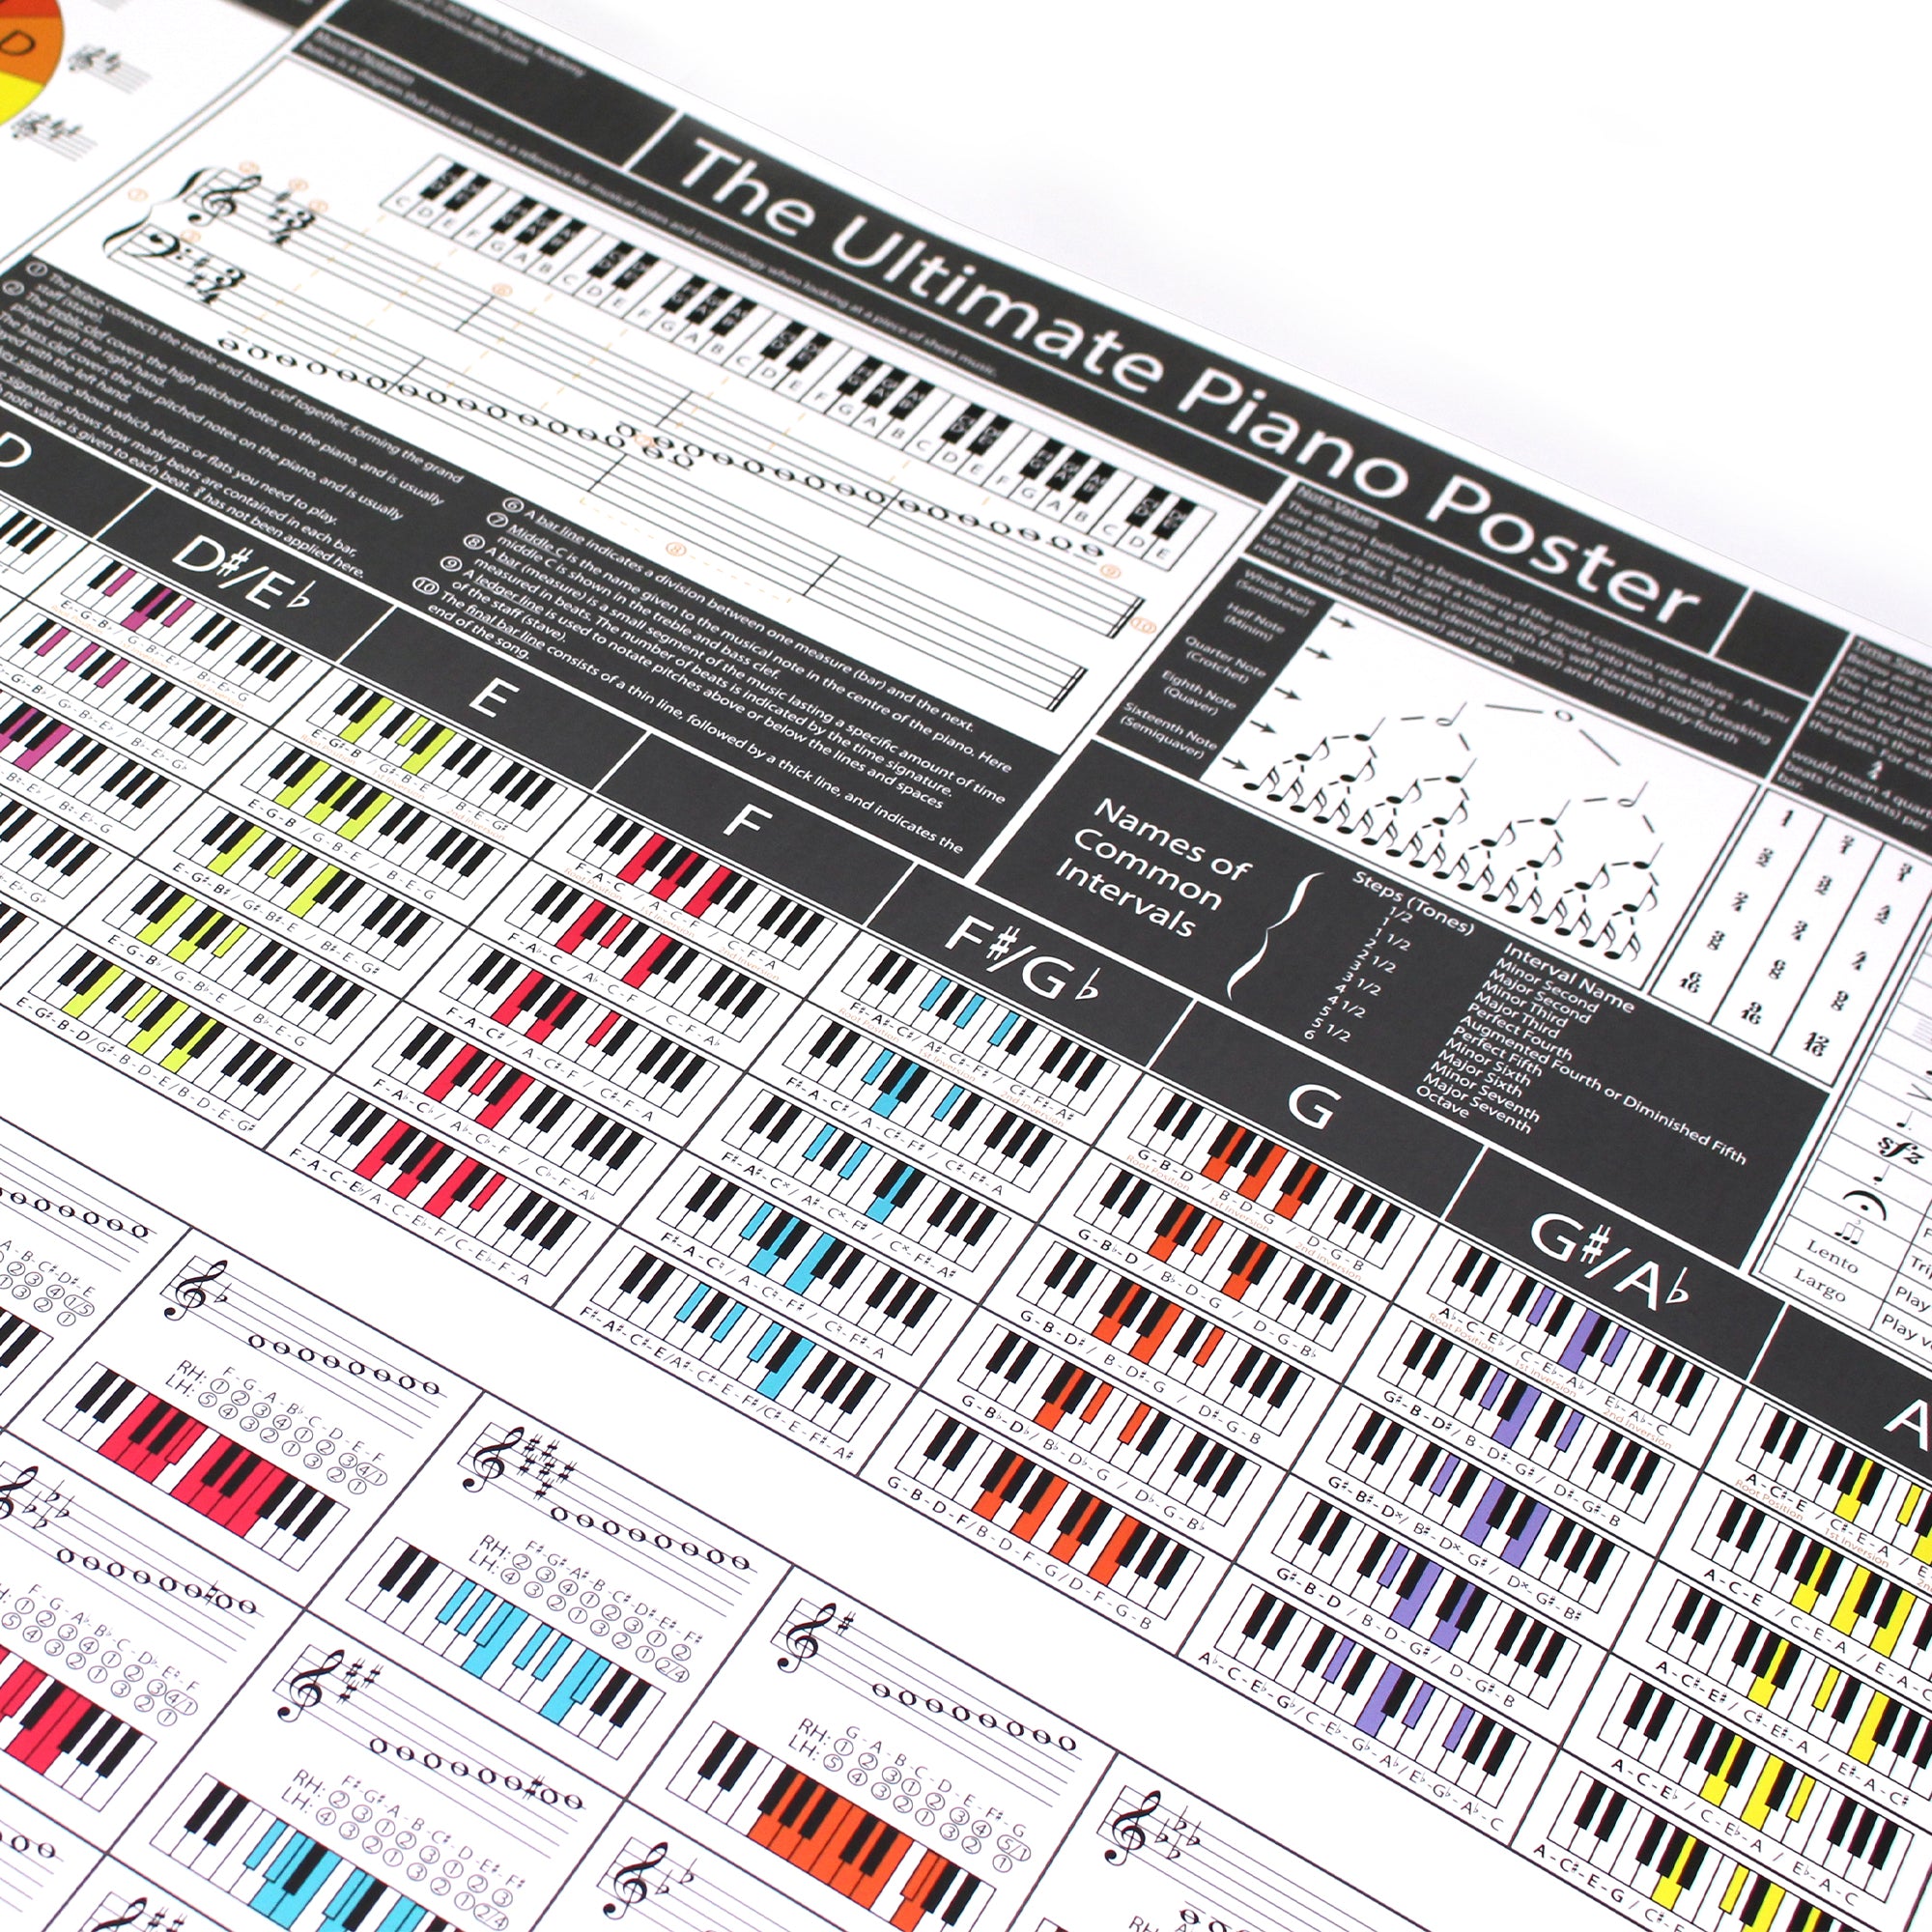 The Ultimate Piano Poster (Grey-White) & The Big Piano Chords Poster (Special Offer - 50% Off Bundle)